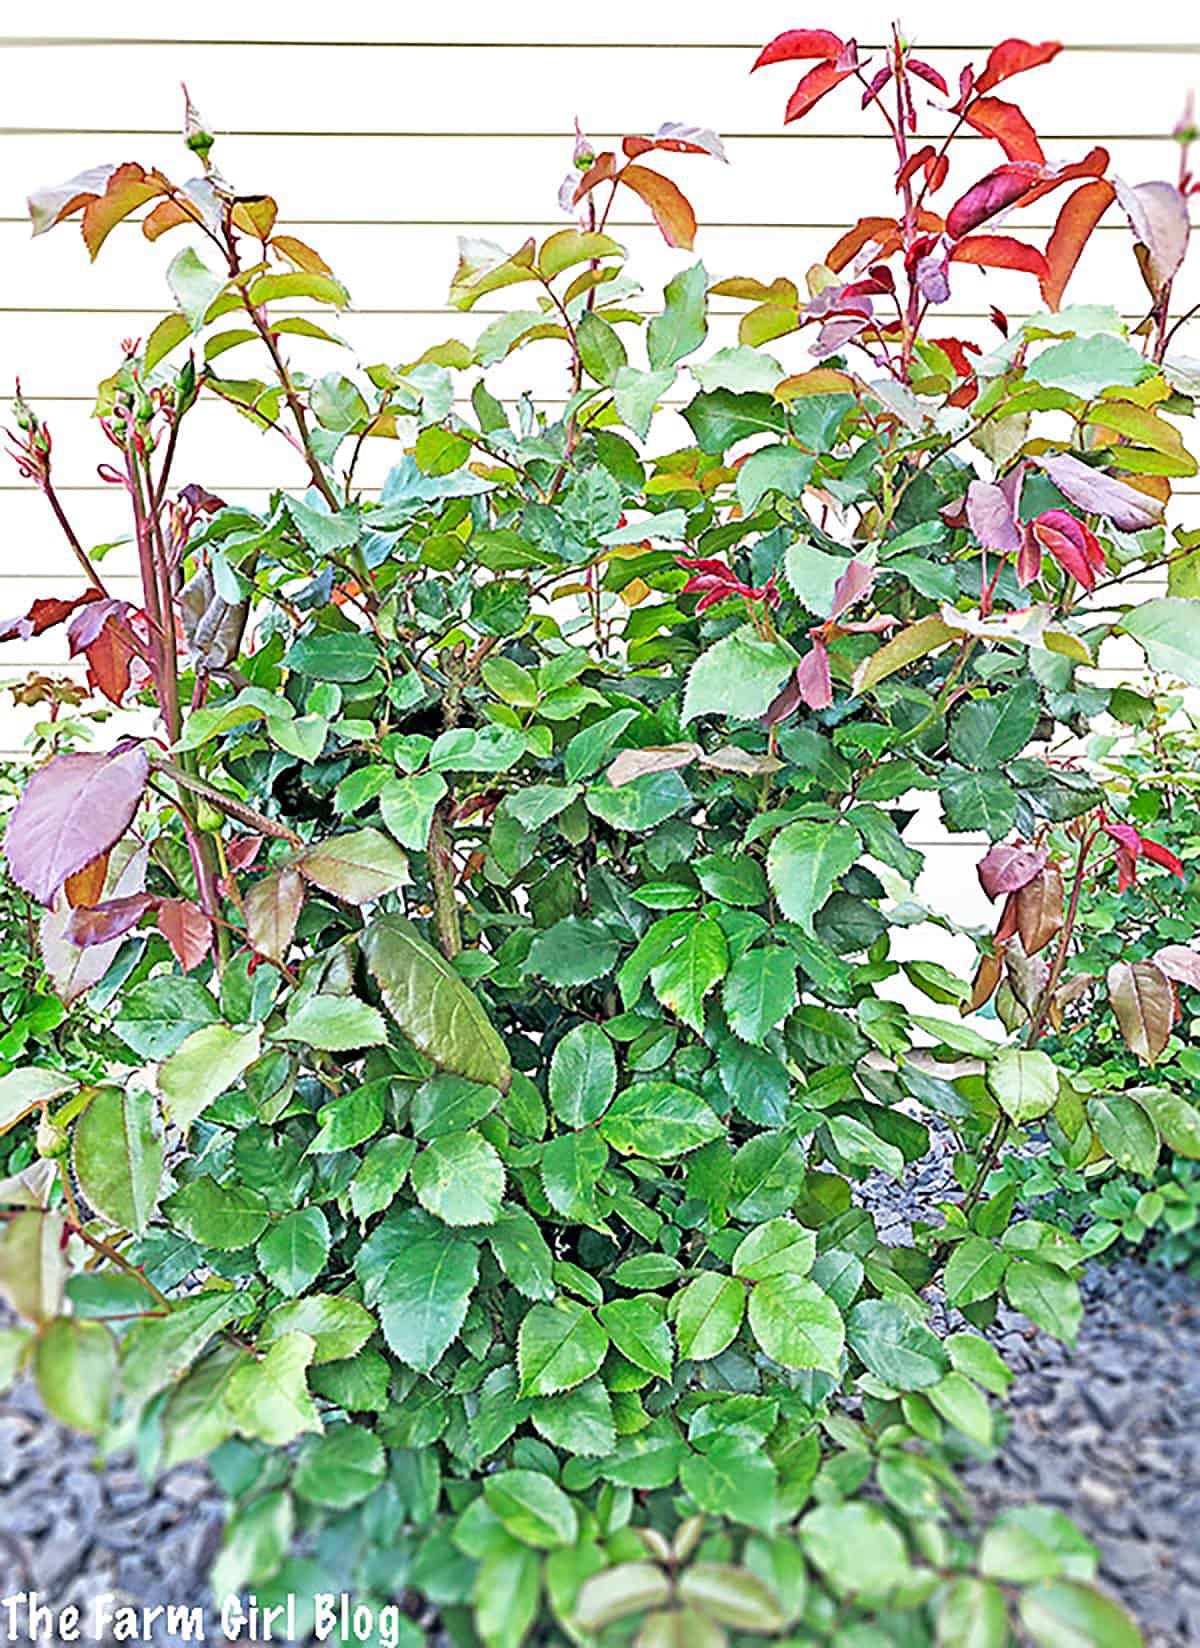 Weak, thin stems are often the result of poor nutrition or disease. By removing them, you are encouraging the rose bush to put its energy into developing stronger, healthier stems that will produce more flowers.